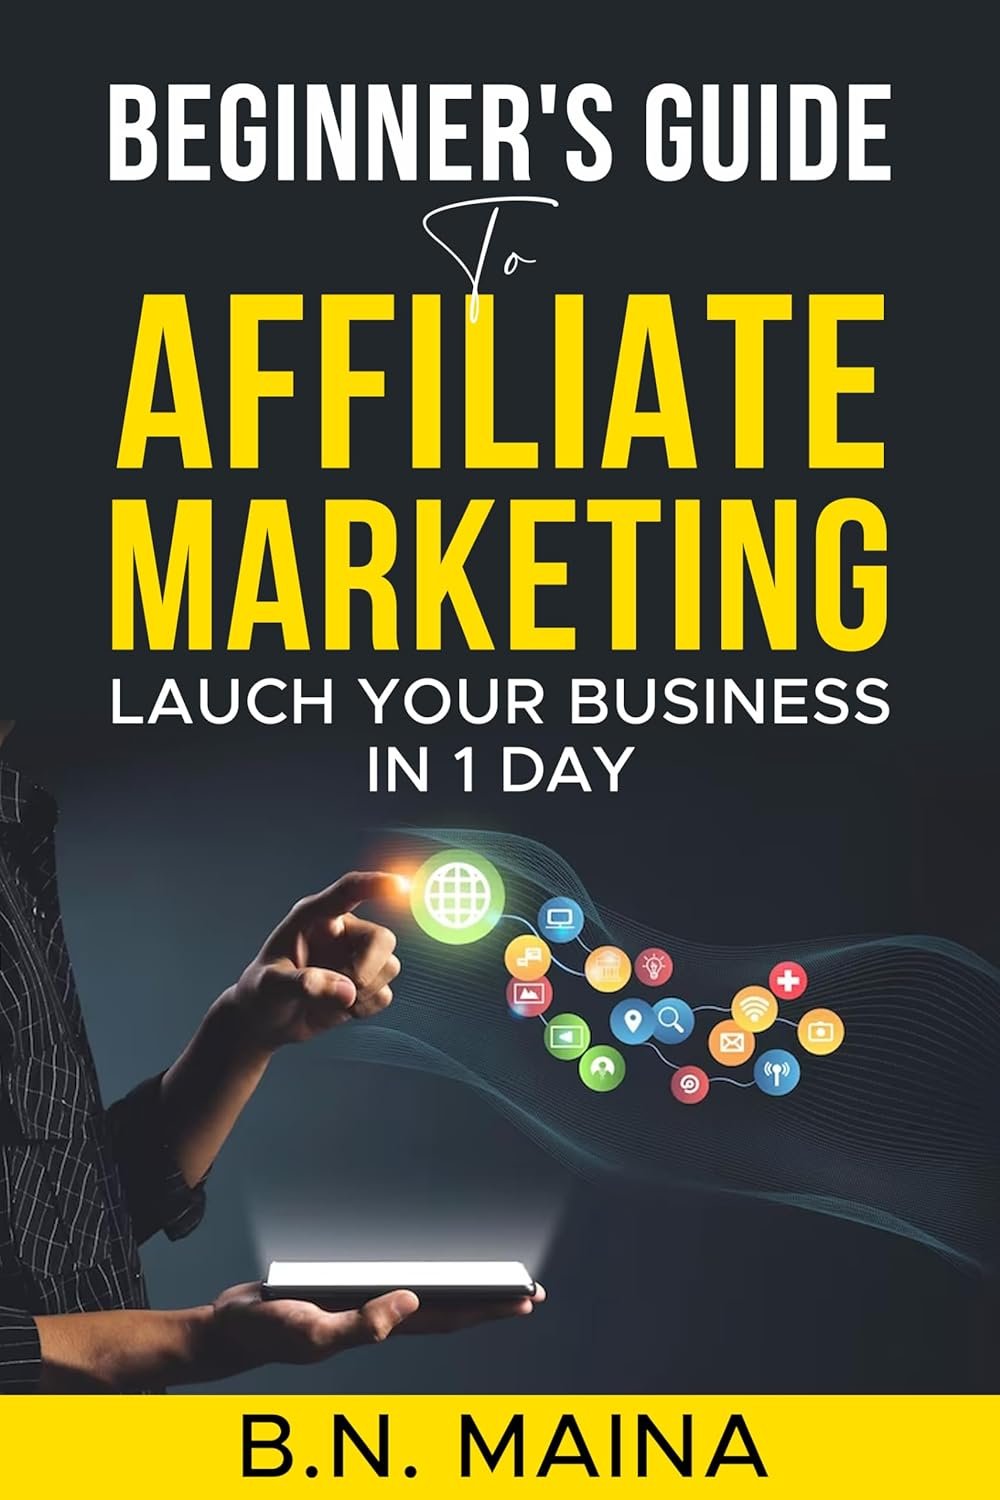 Kindle Edition Beginner’s Guide to Affiliate Marketing Review